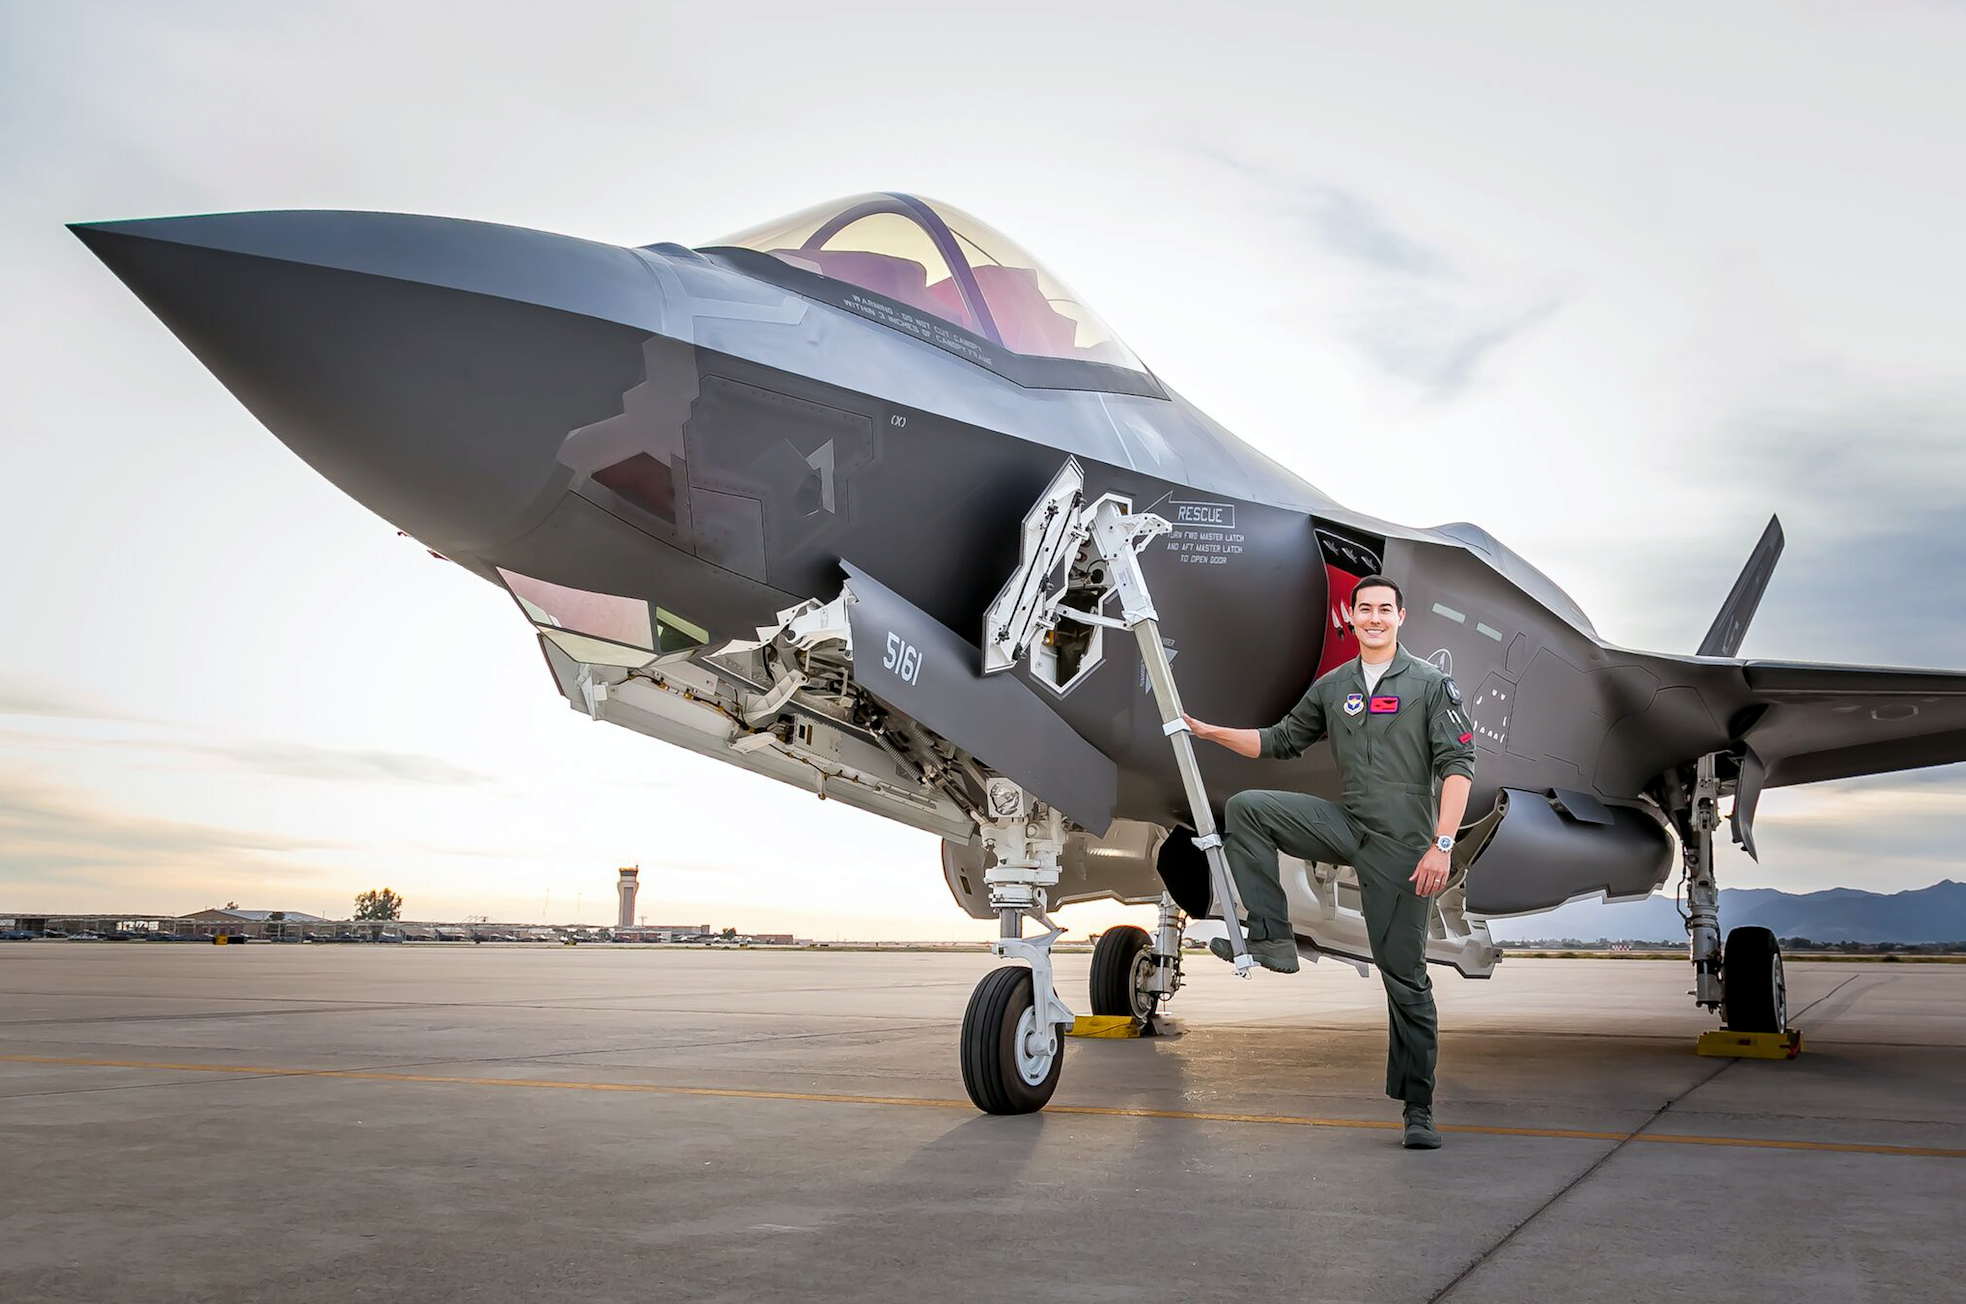 The F-35 is a formidable jet fighter